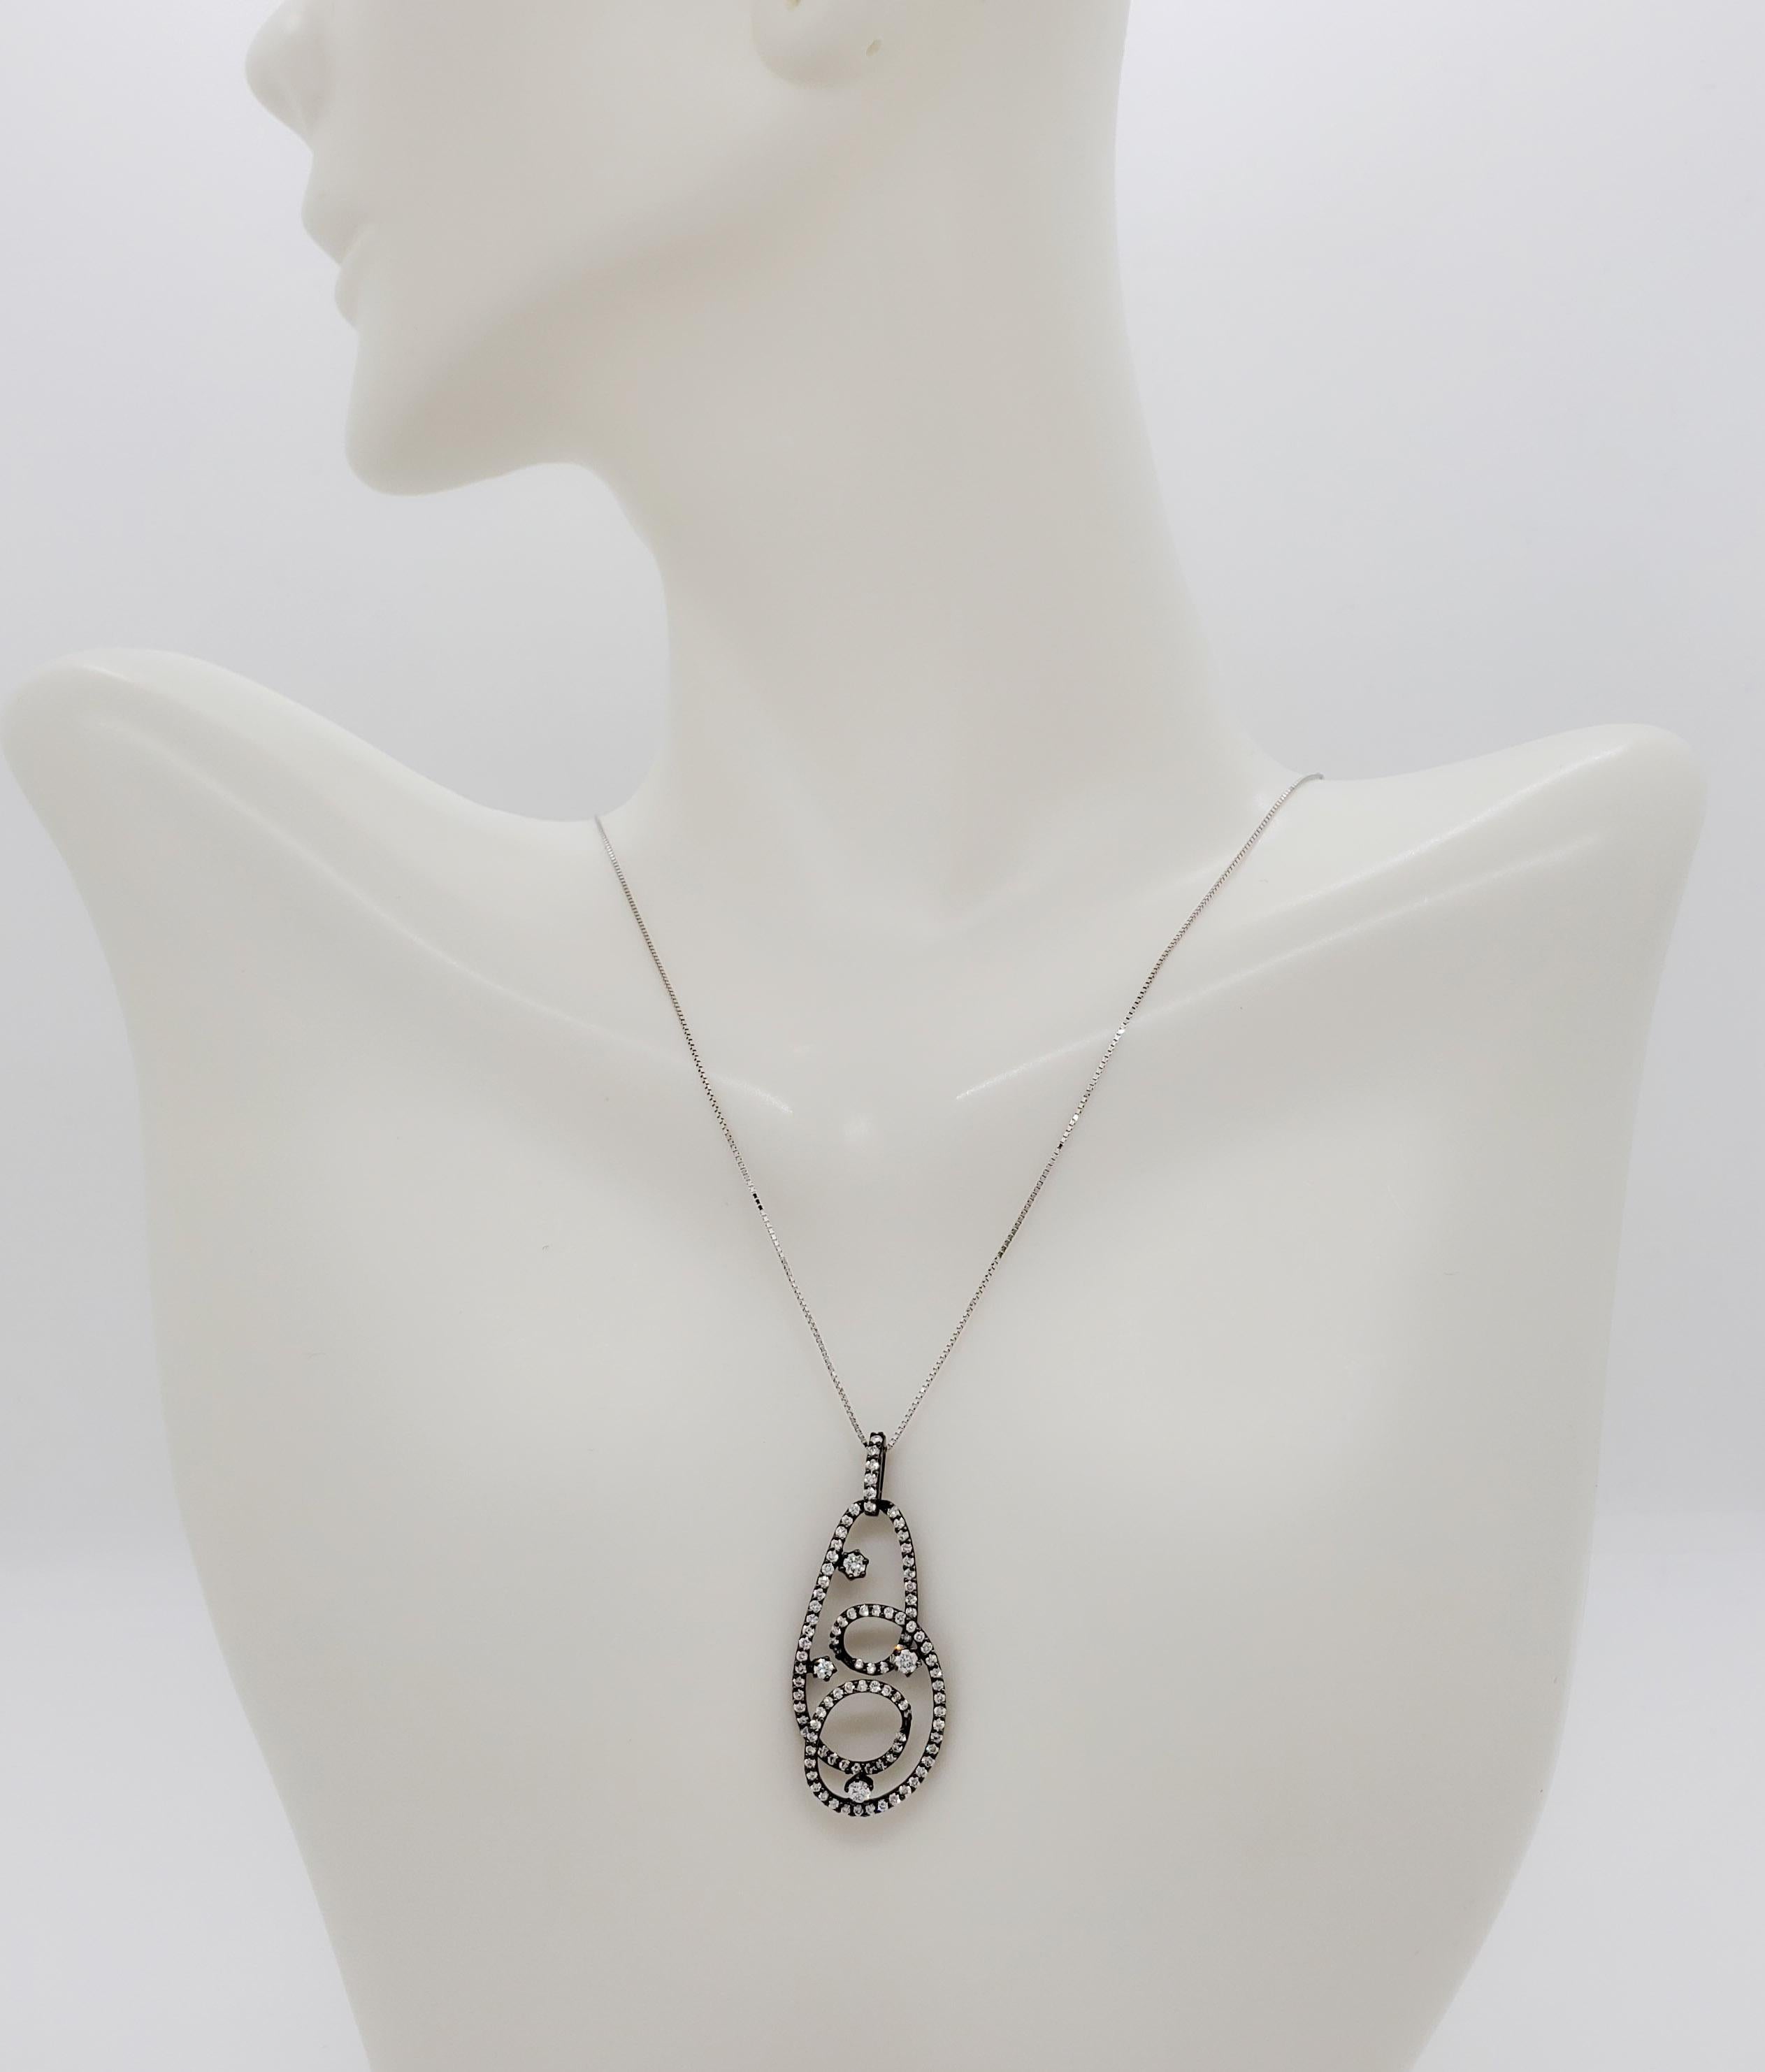 Beautiful pendant with 0.64 ct. good quality, white, and bright diamond rounds.  Handmade in 14k white gold and black rhodium.  Chain is 18